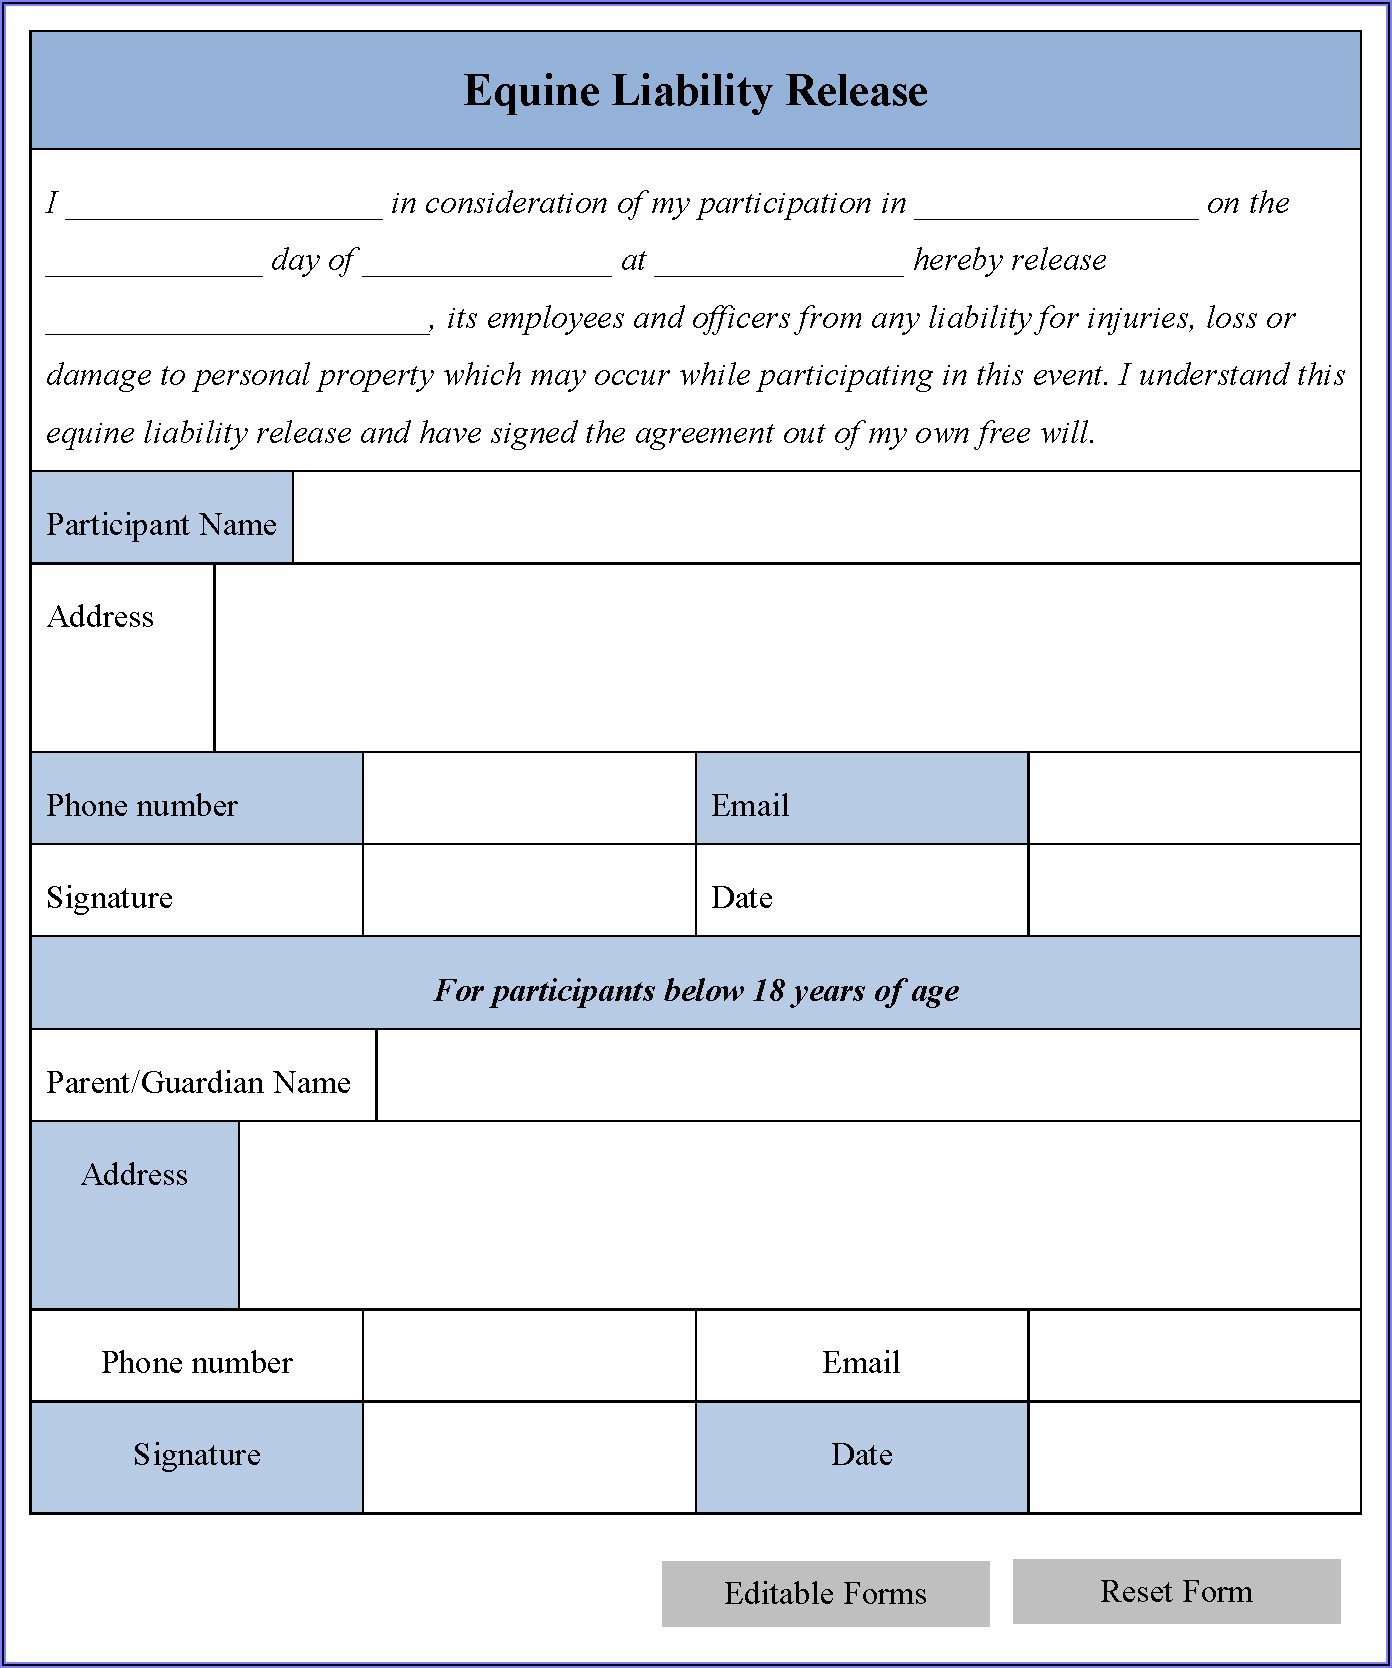 Equine Liability Release Forms